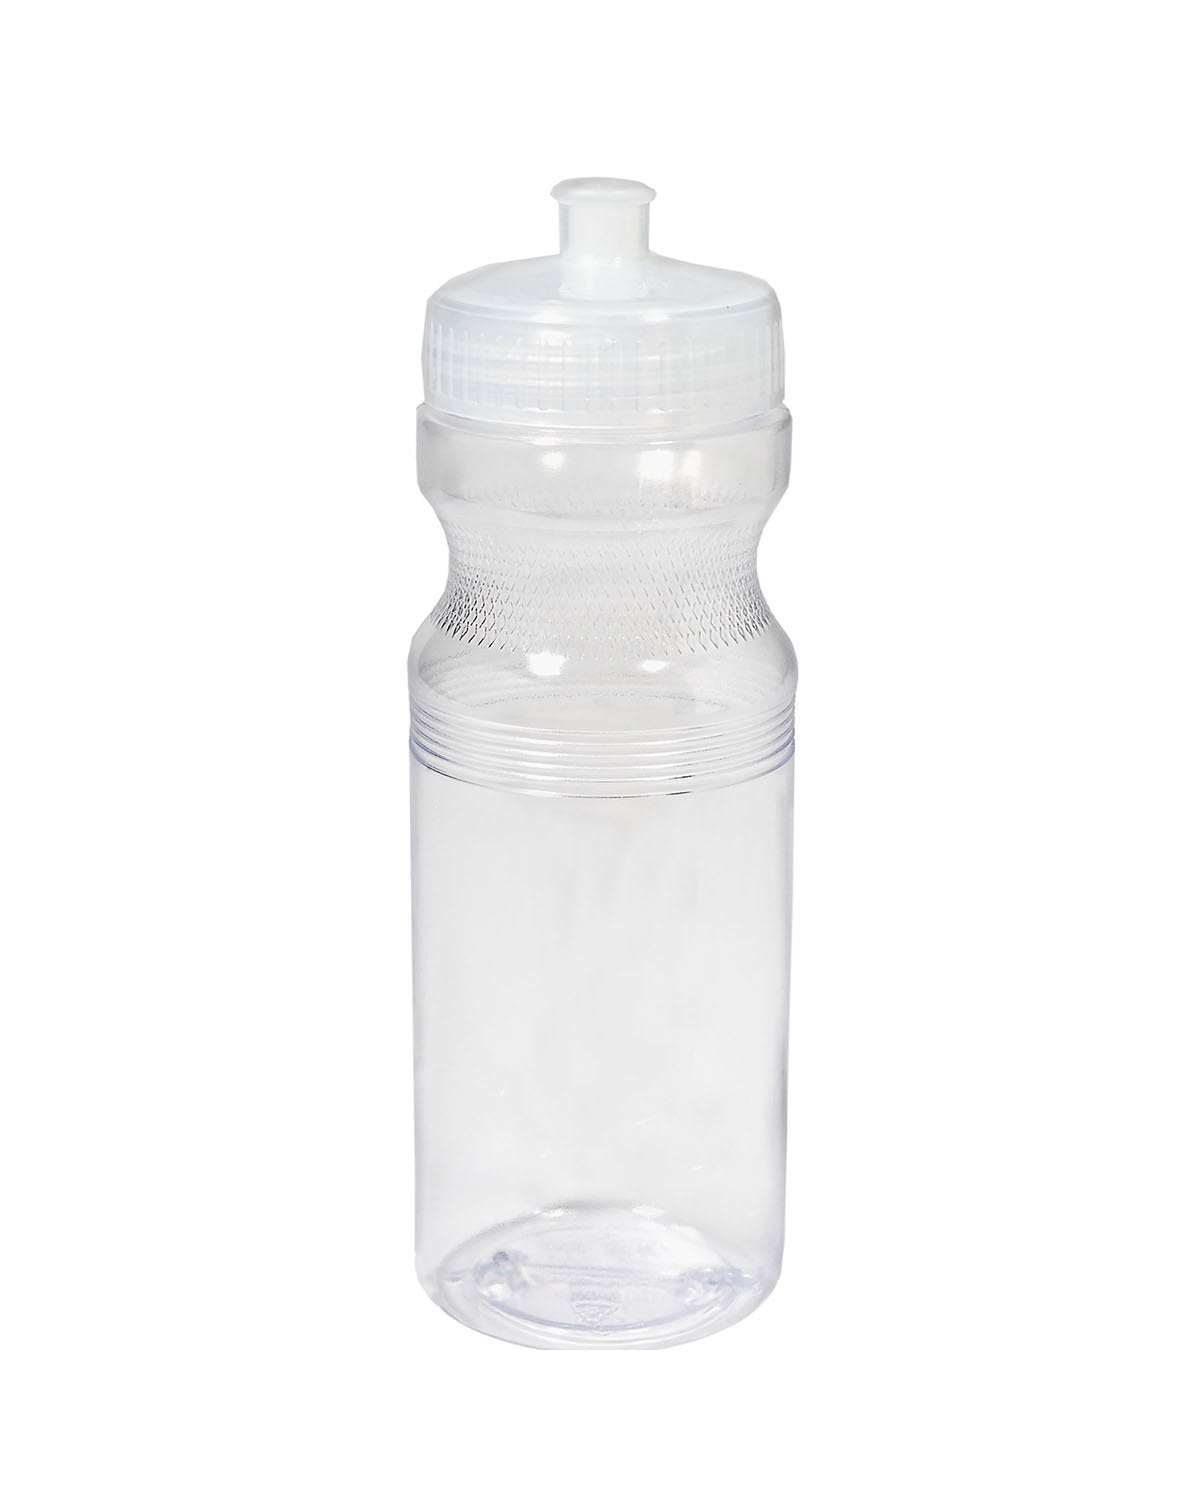 24oz Big Squeeze Sport Bottle With Lid